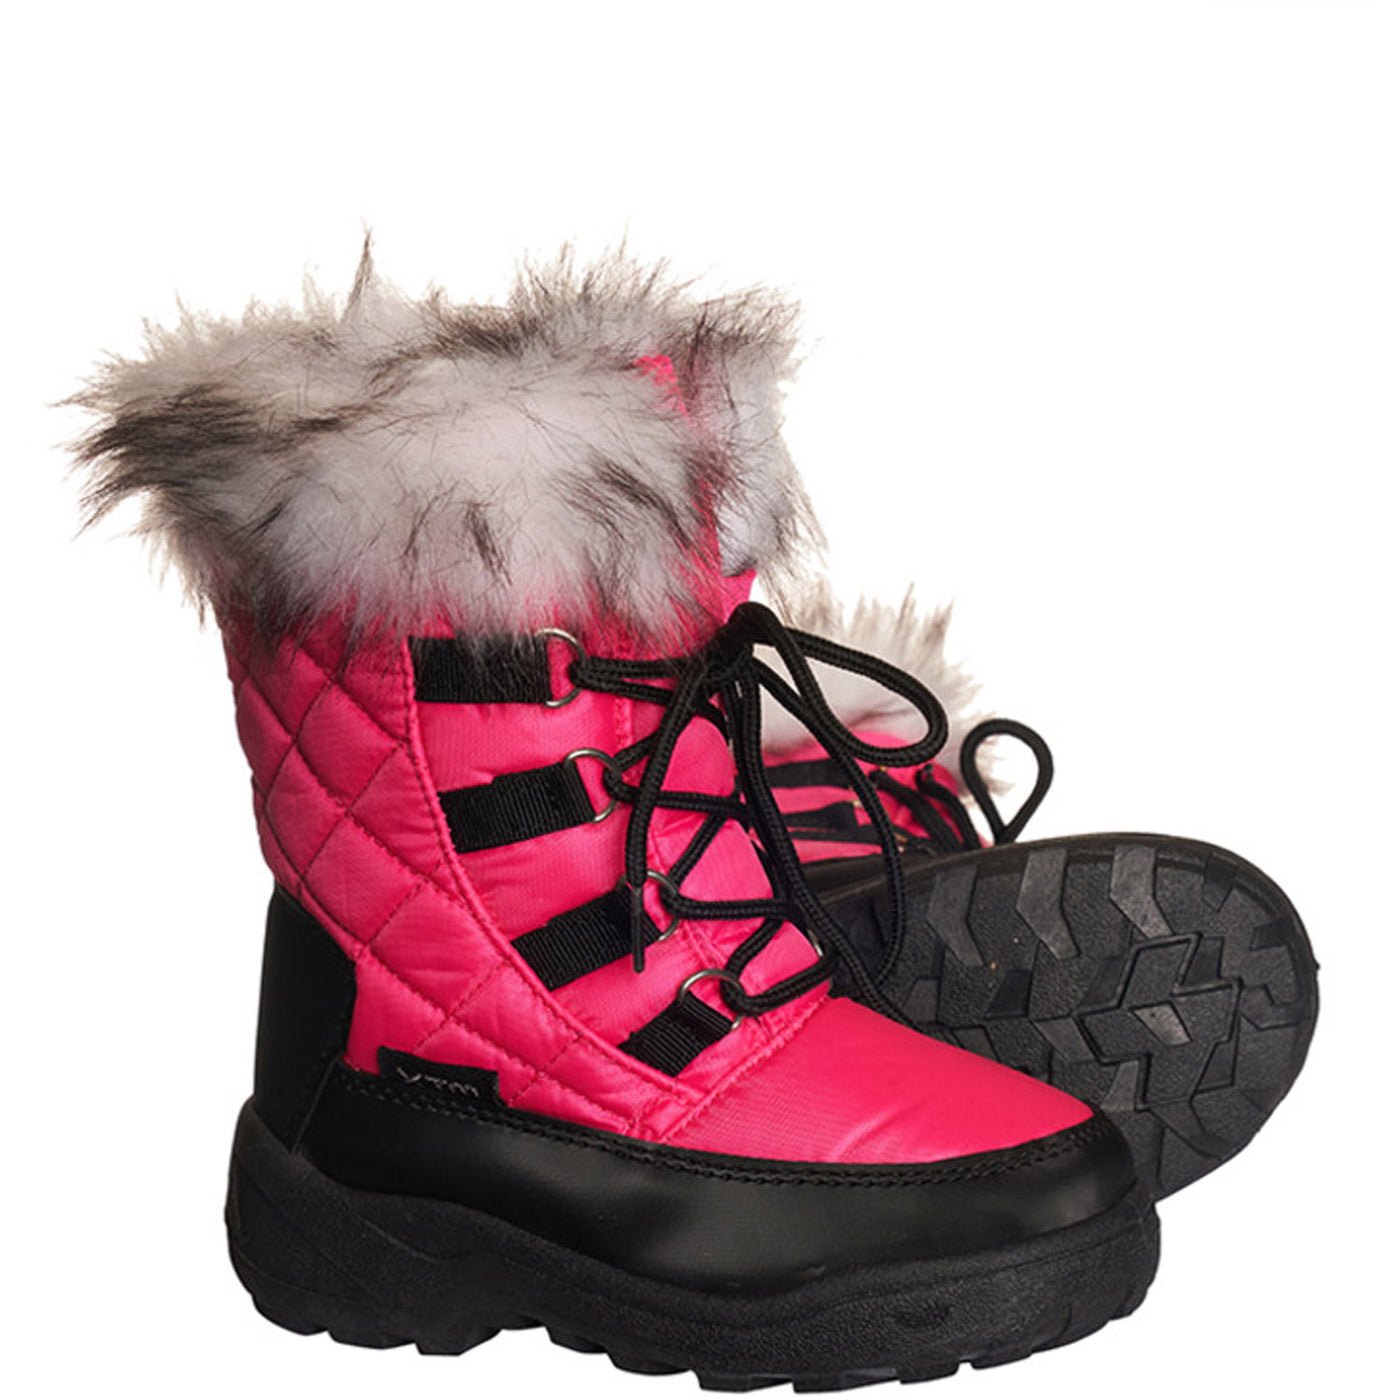 Kids Apre Boots - Own It Now, Pay Later with Zip - Auski Australia